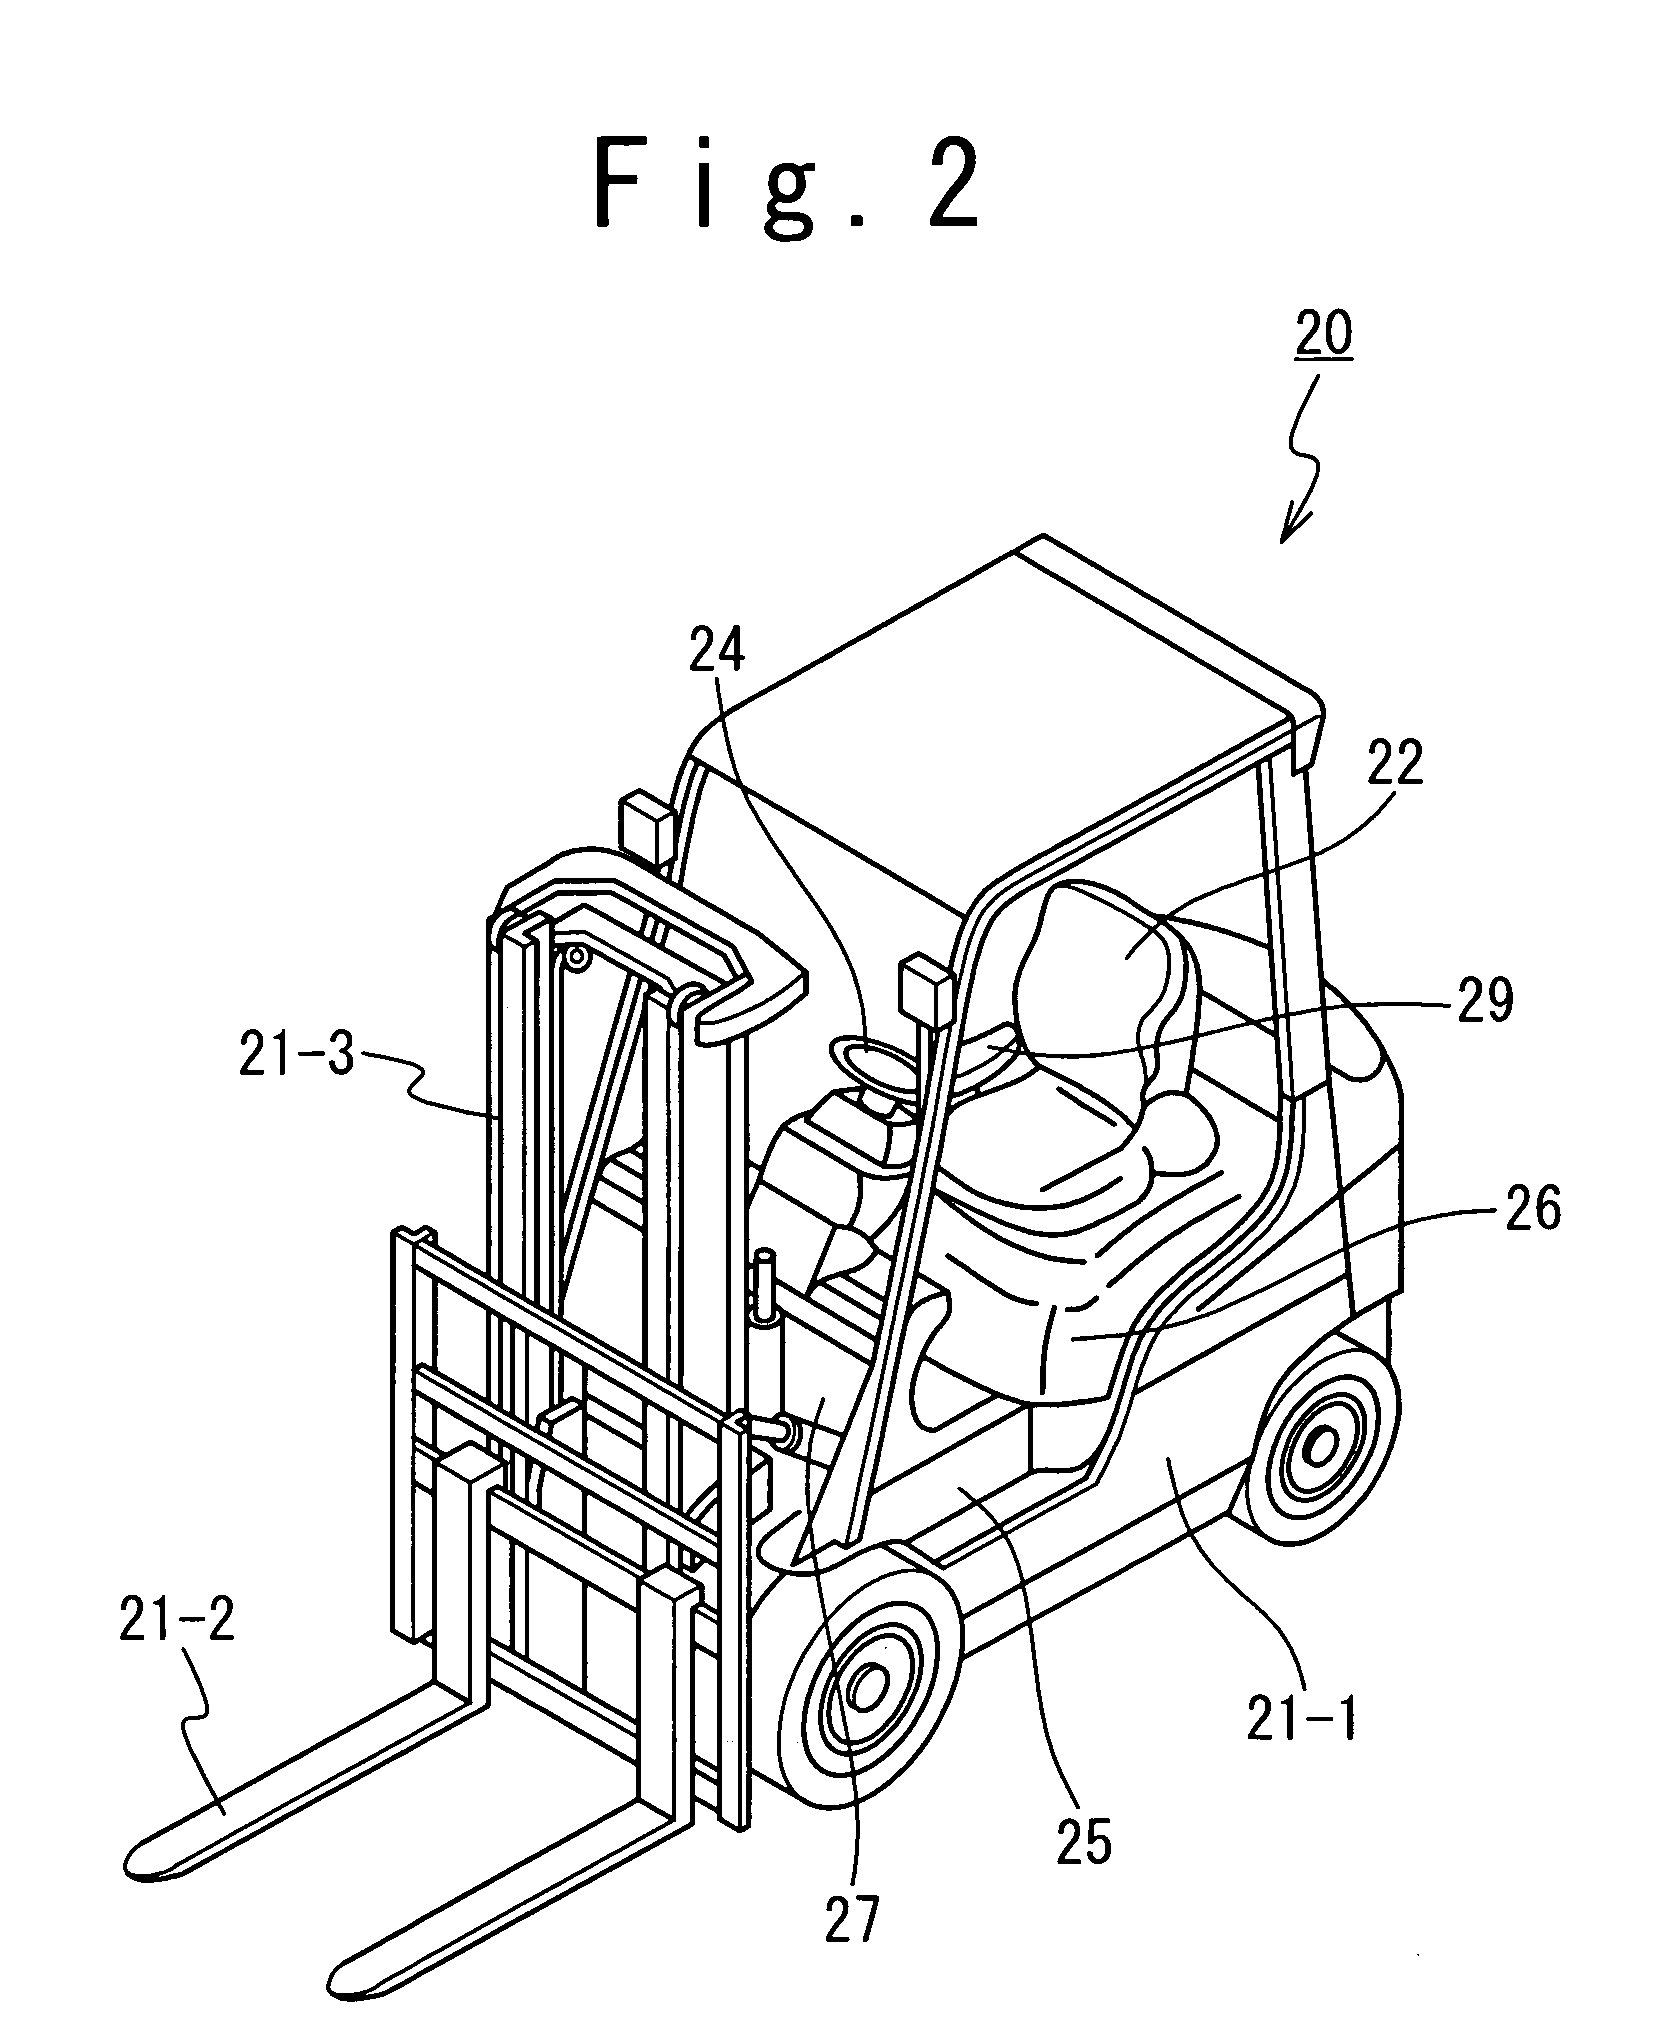 Distributed control system for forklift